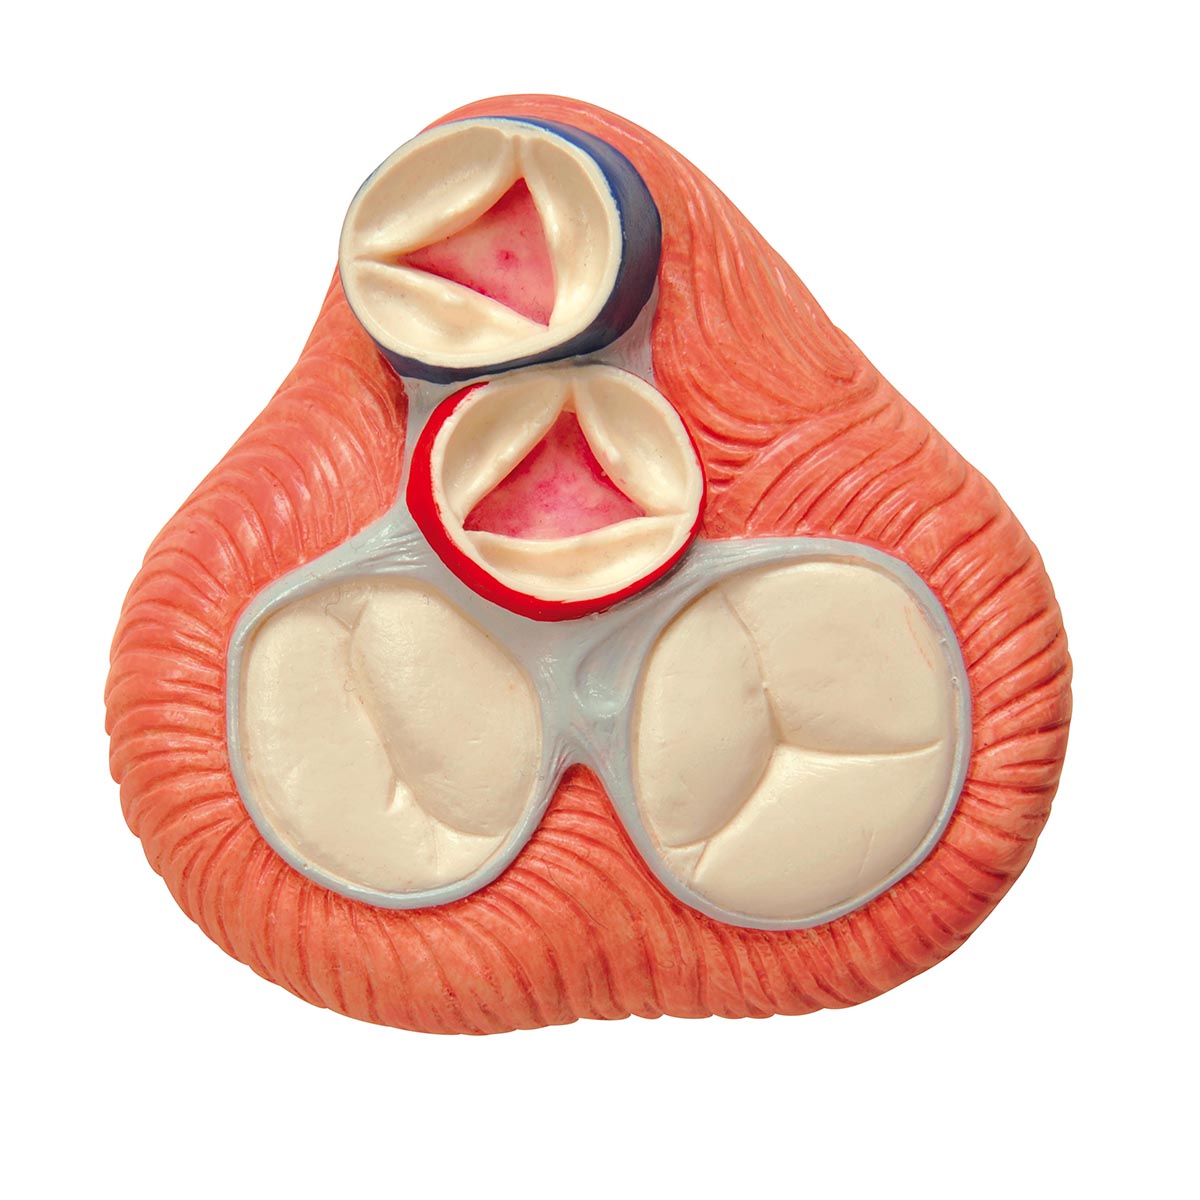 Heart model with focus on the 4 heart valves and cast after a real heart